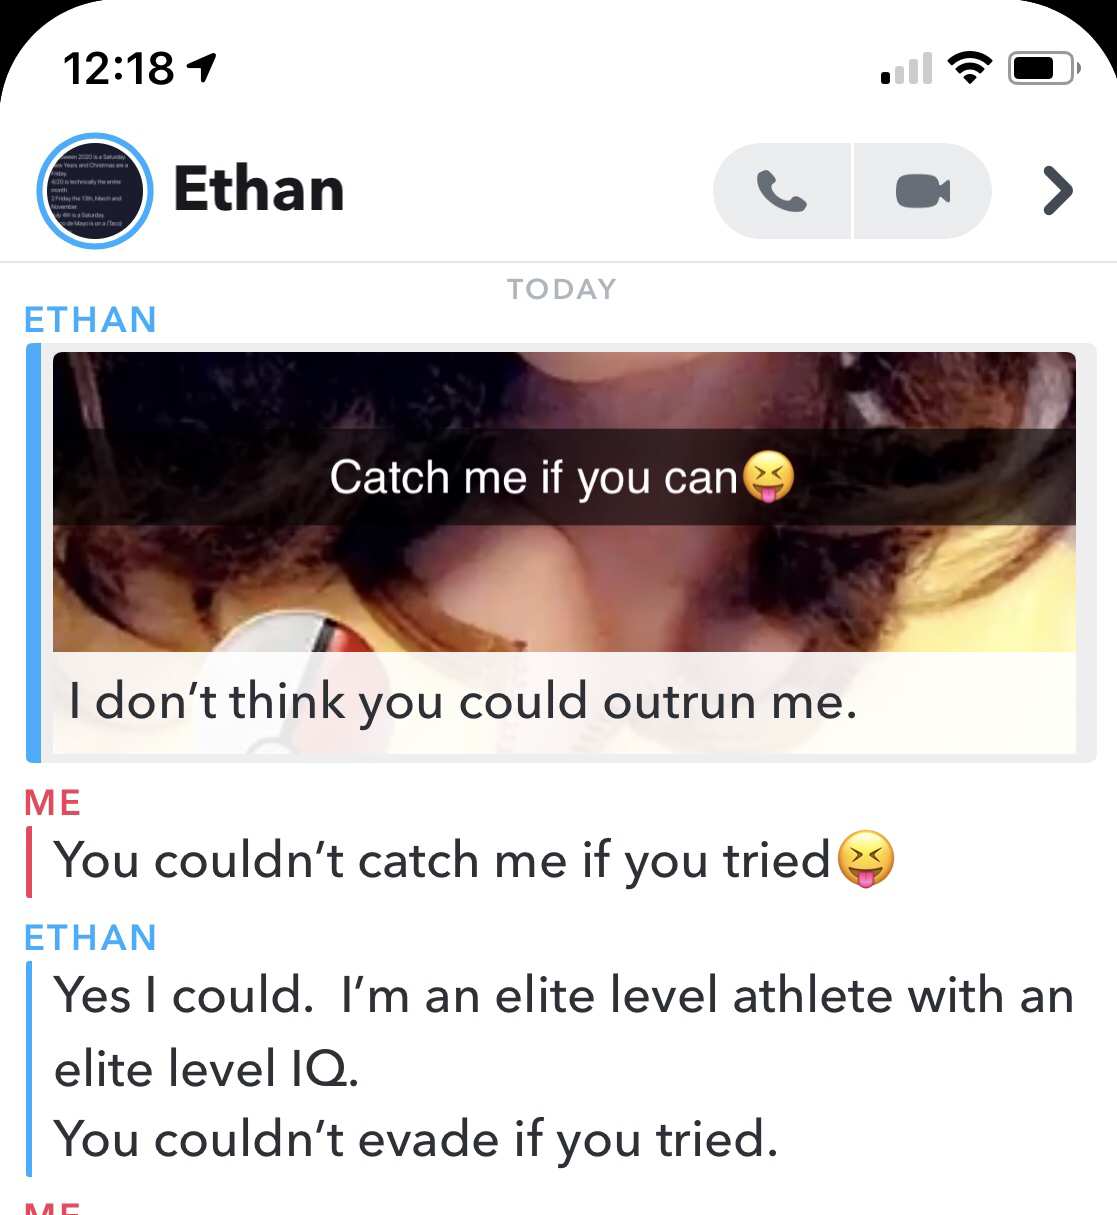 eyelash - 1 Ethan Today Ethan Catch me if you canes I don't think you could outrun me. Me You couldn't catch me if you tried Ethan Yes I could. I'm an elite level athlete with an elite level Iq. You couldn't evade if you tried.